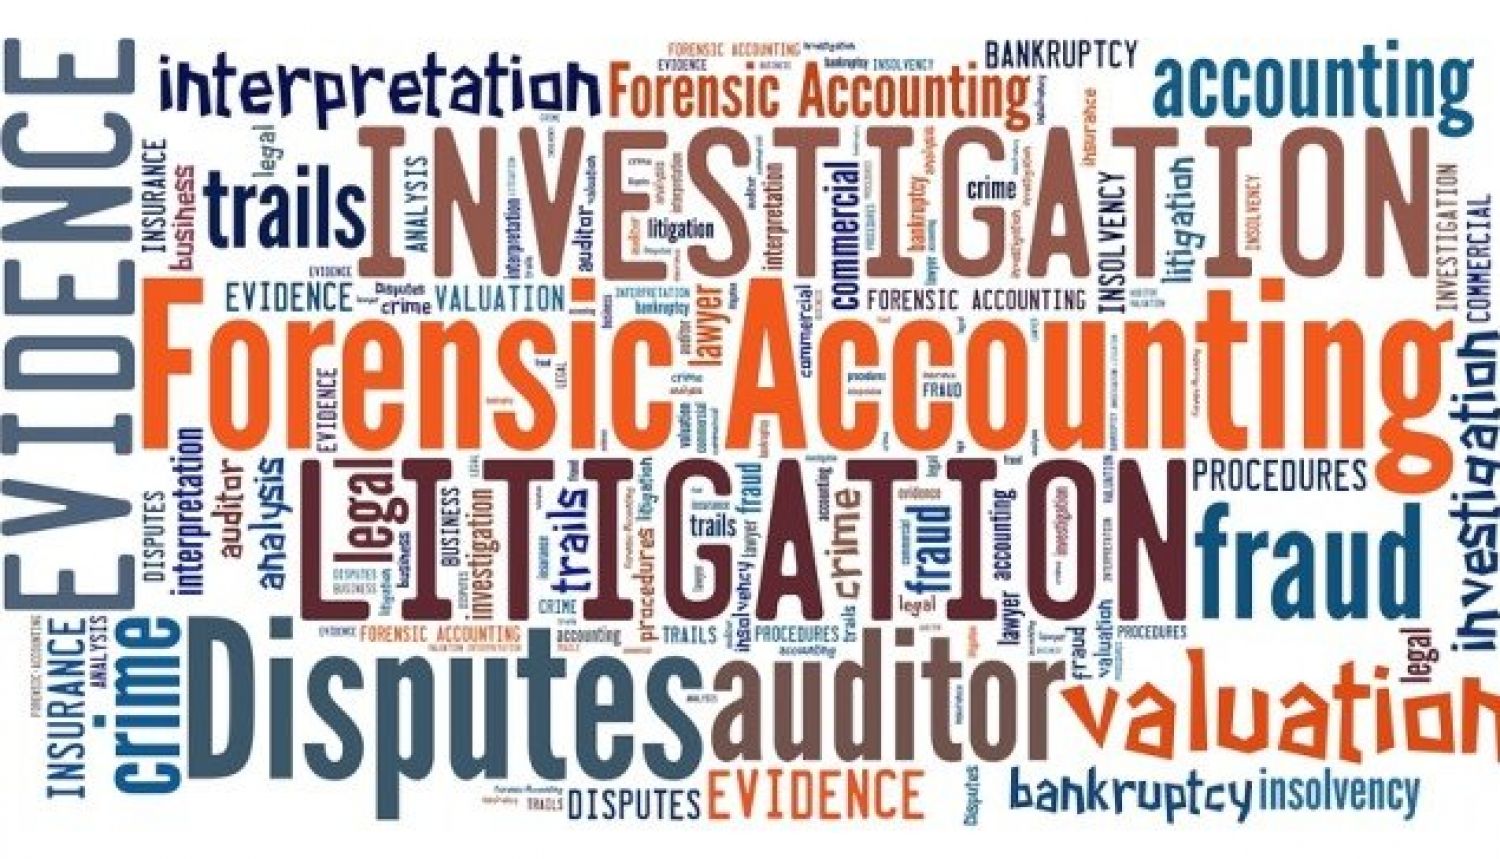 BASIC FORENSIC AUDIT ASPECTS IN INSOLVENCY AND CODE BANKRUPTCY 2016